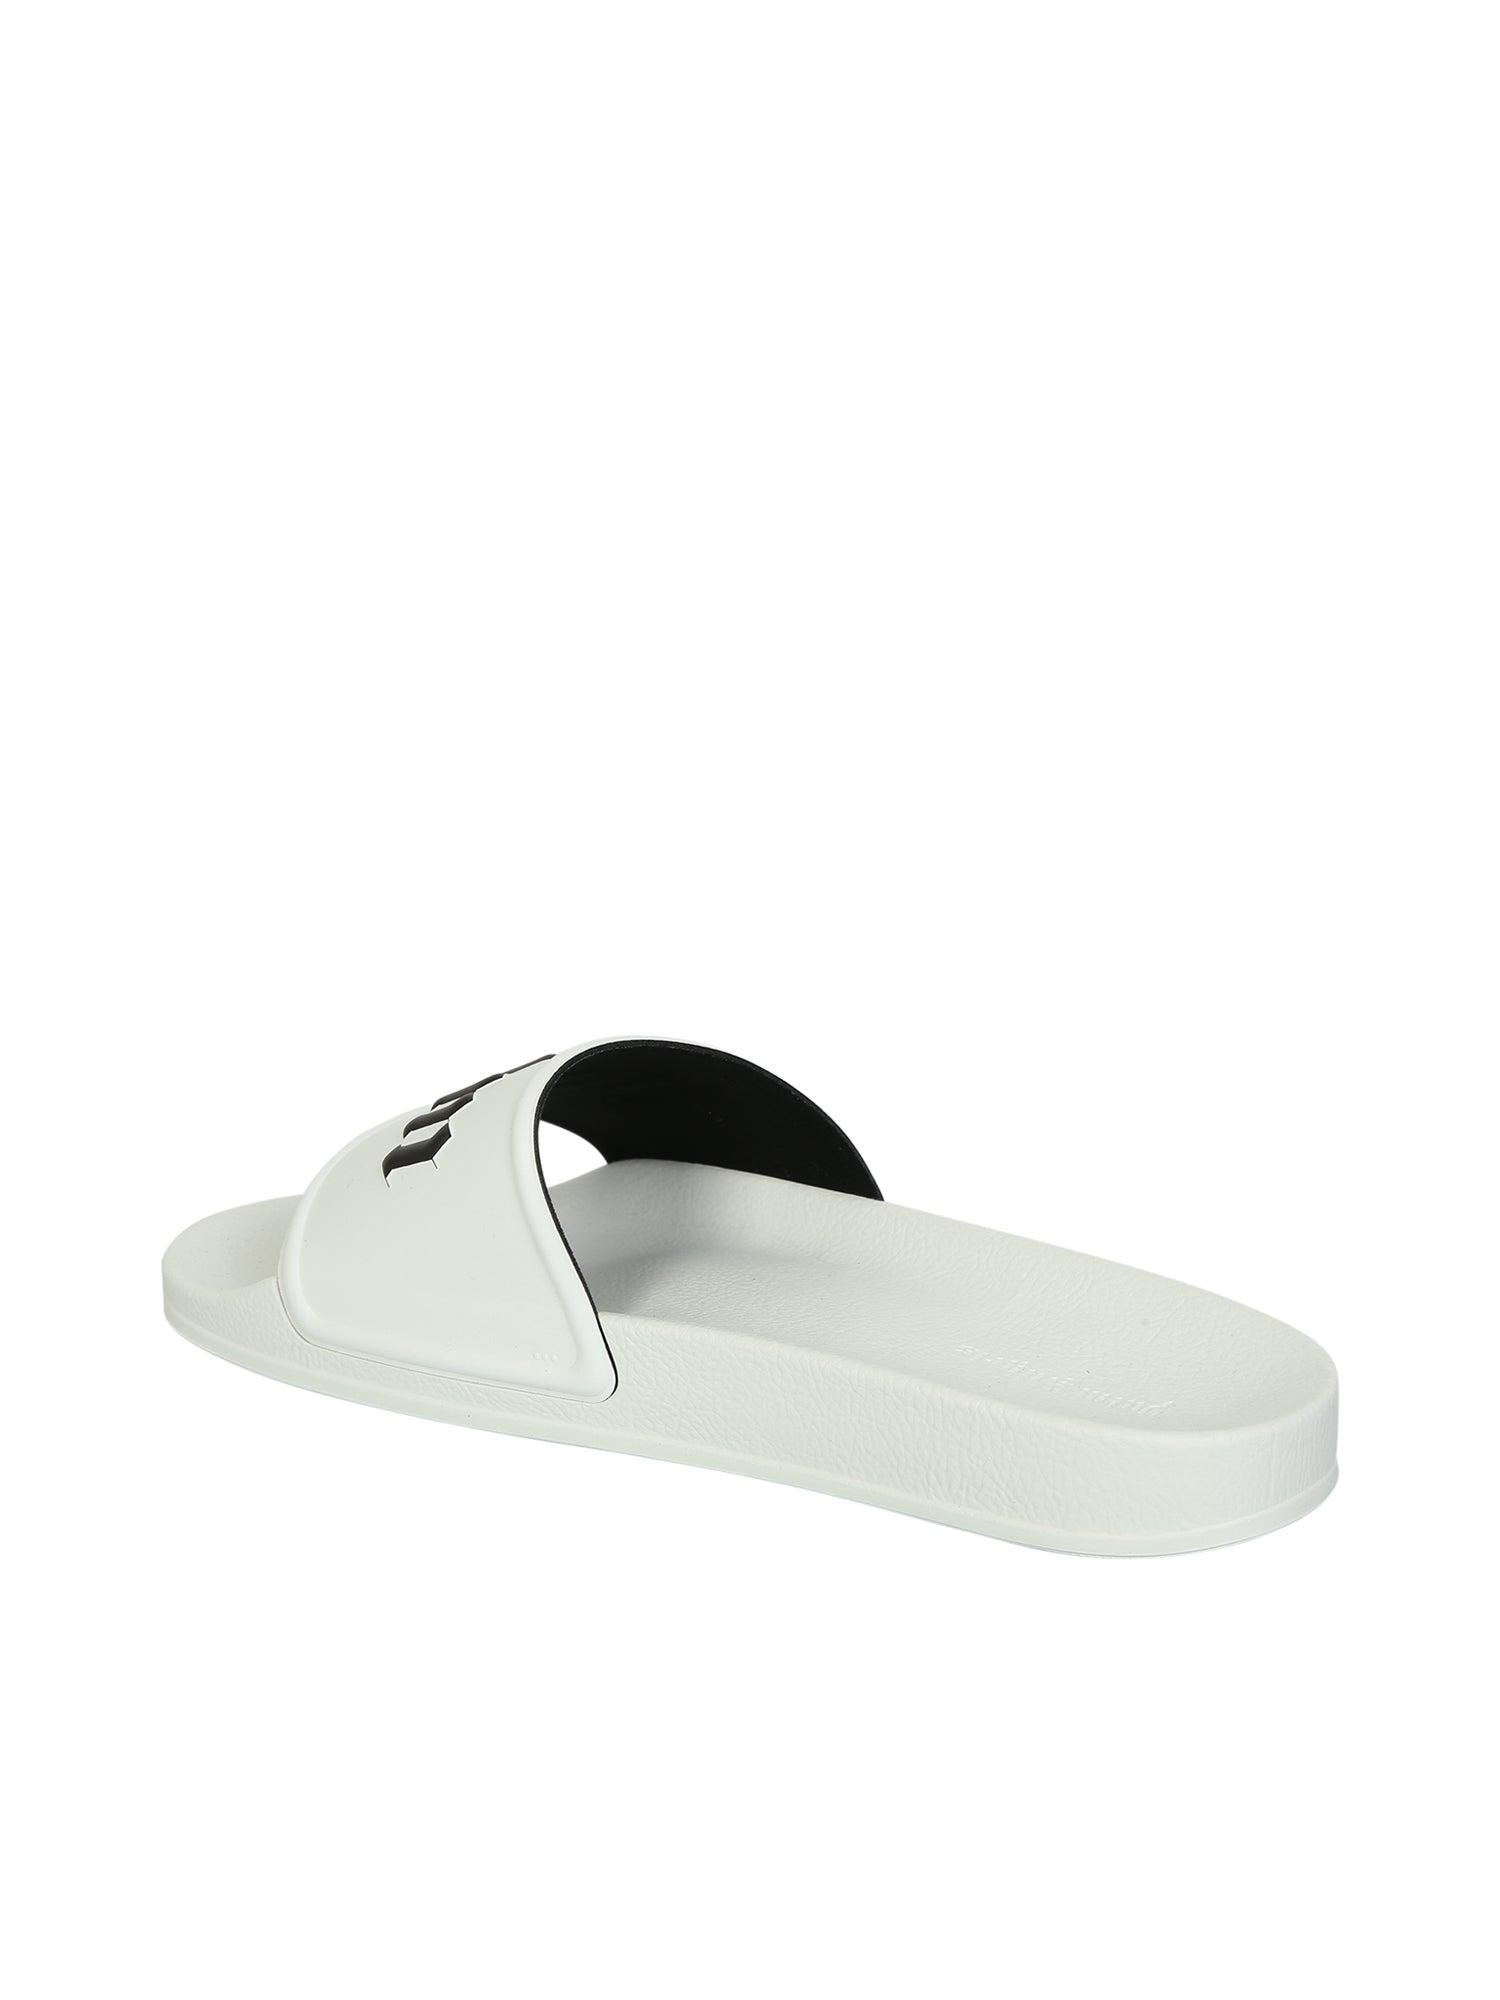 slides and flip flops Leather sandals Mens Shoes Sandals Palm Angels Slides Sandals With The Famous Brand Logo That Stands Out Giving The Model An Exclusive Touch in White for Men 